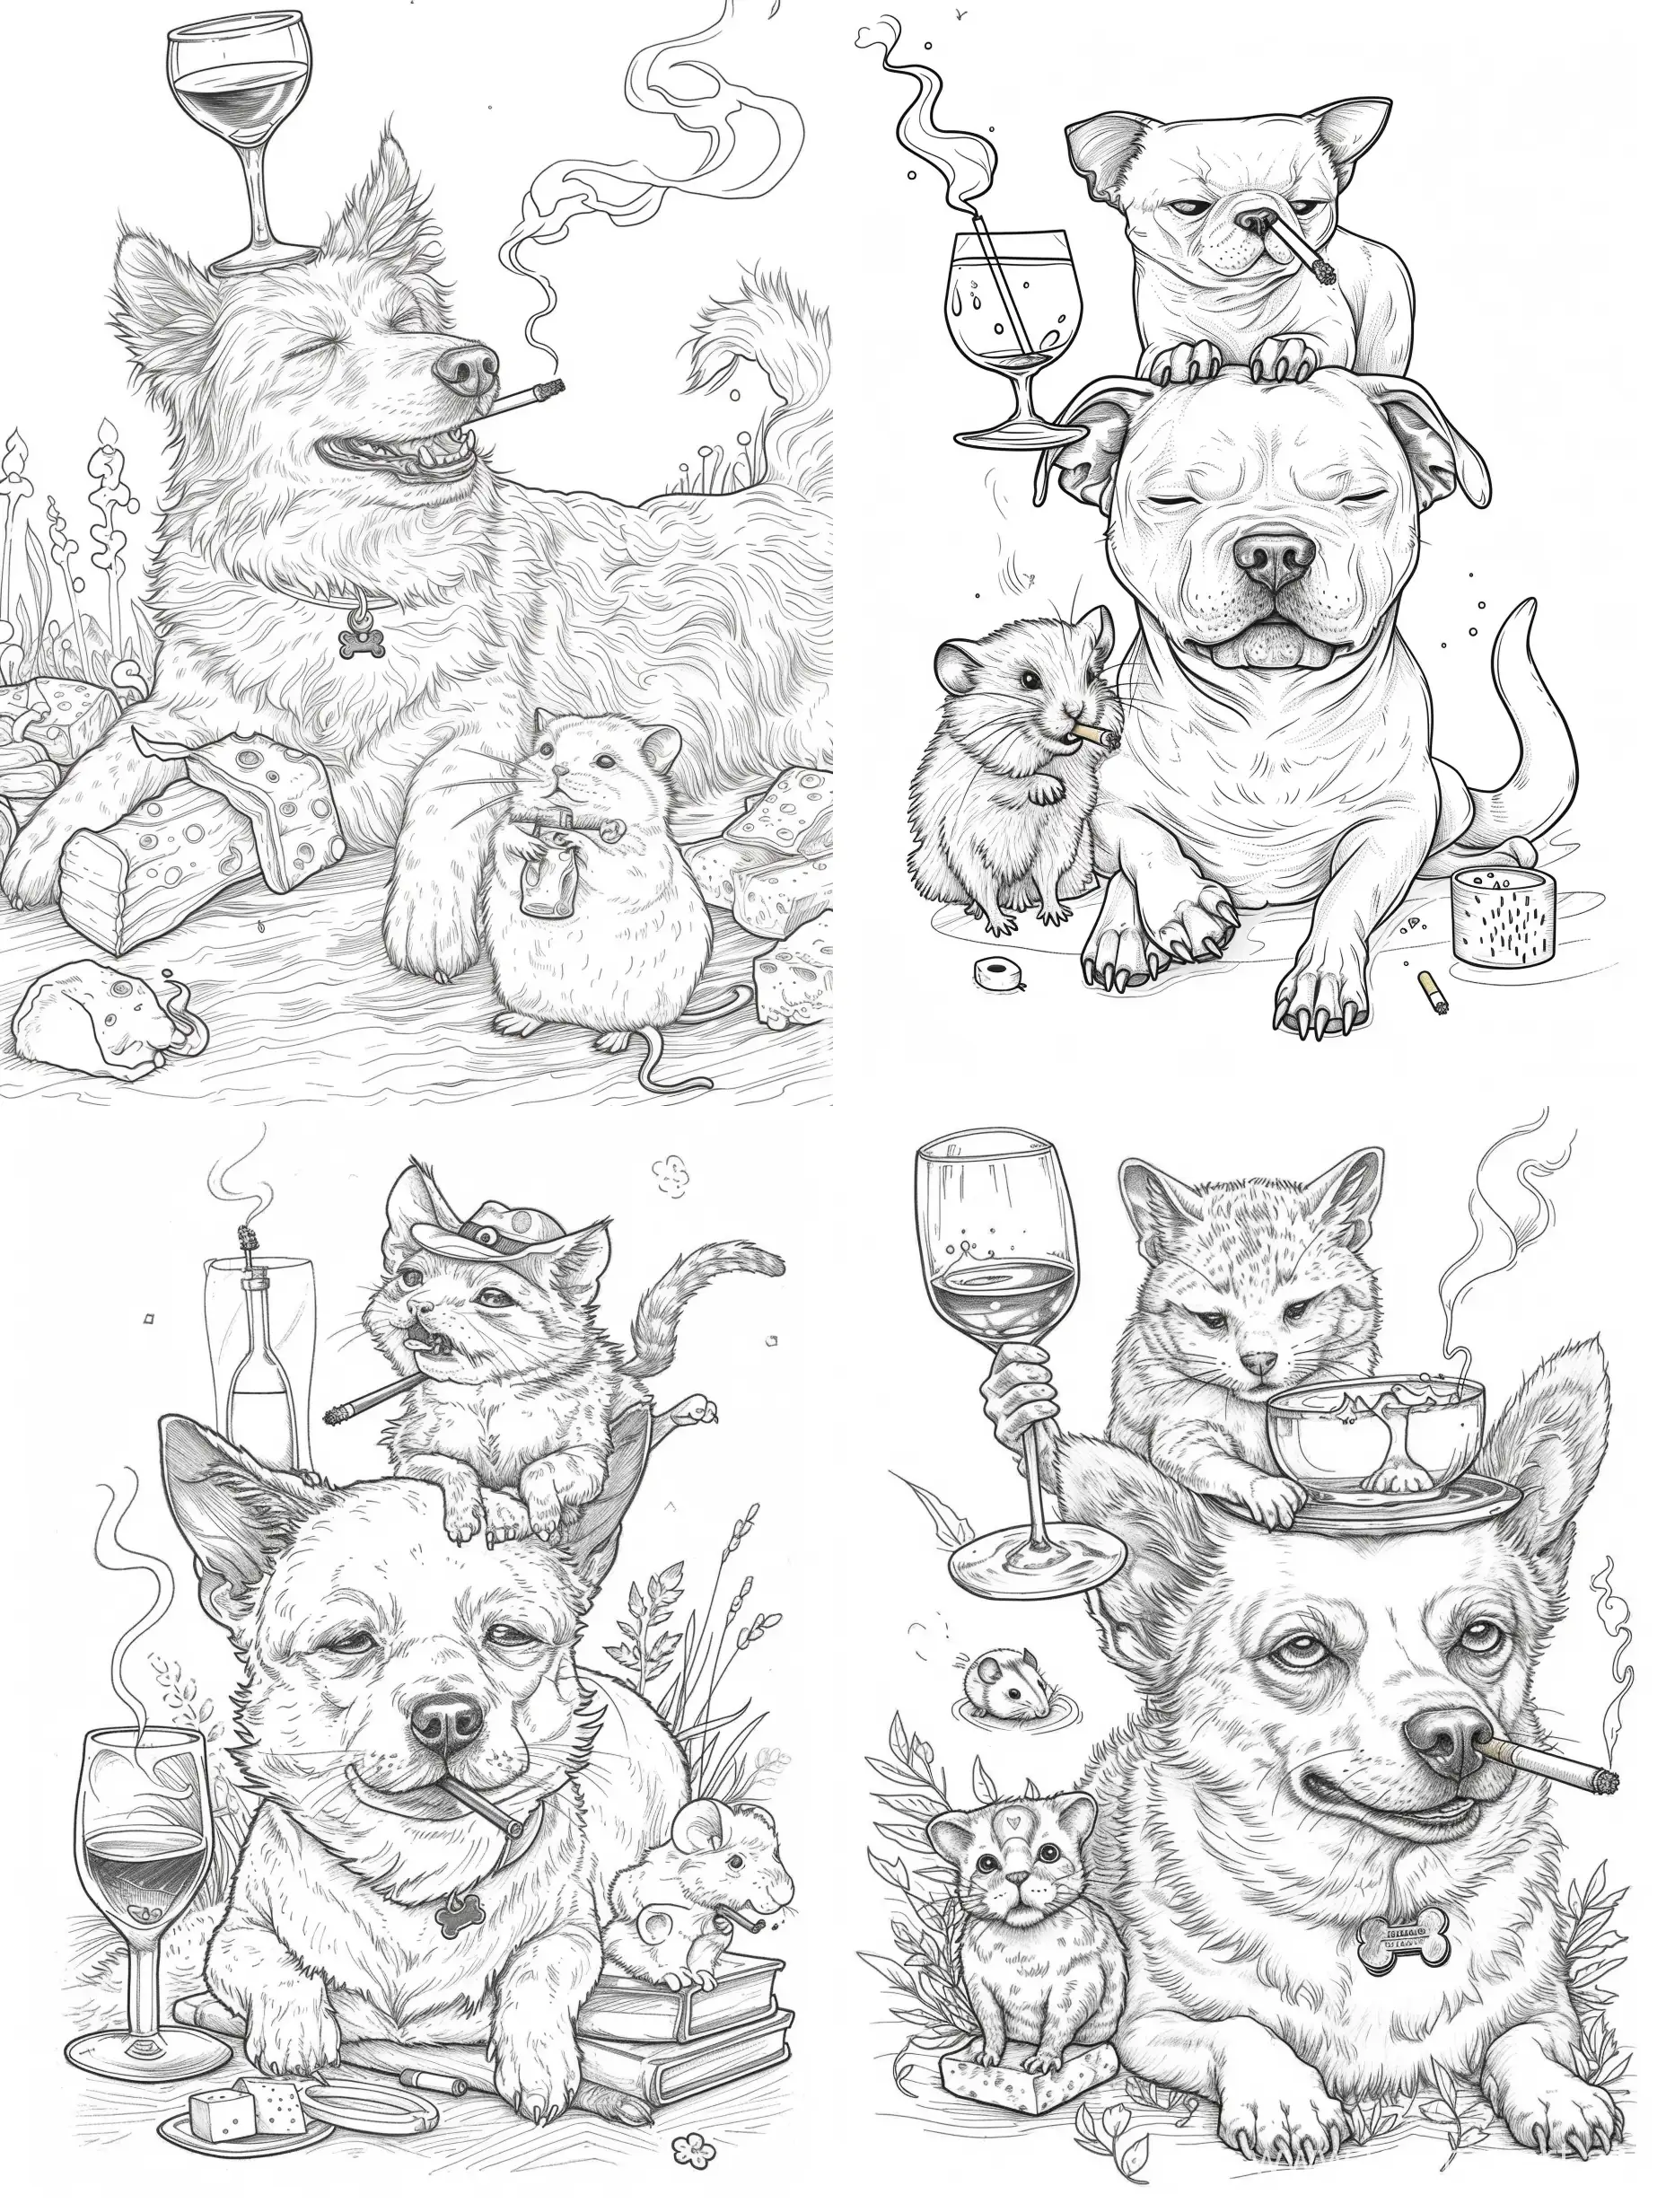 coloring book for children WITHOUT small details. very minimalistic for age three. The coloring book shows a dog with a glass of wine and a cat sitting on its head smoking cigarettes, and a hamster sitting on the cat eating cheese. minimalistic coloring without small details